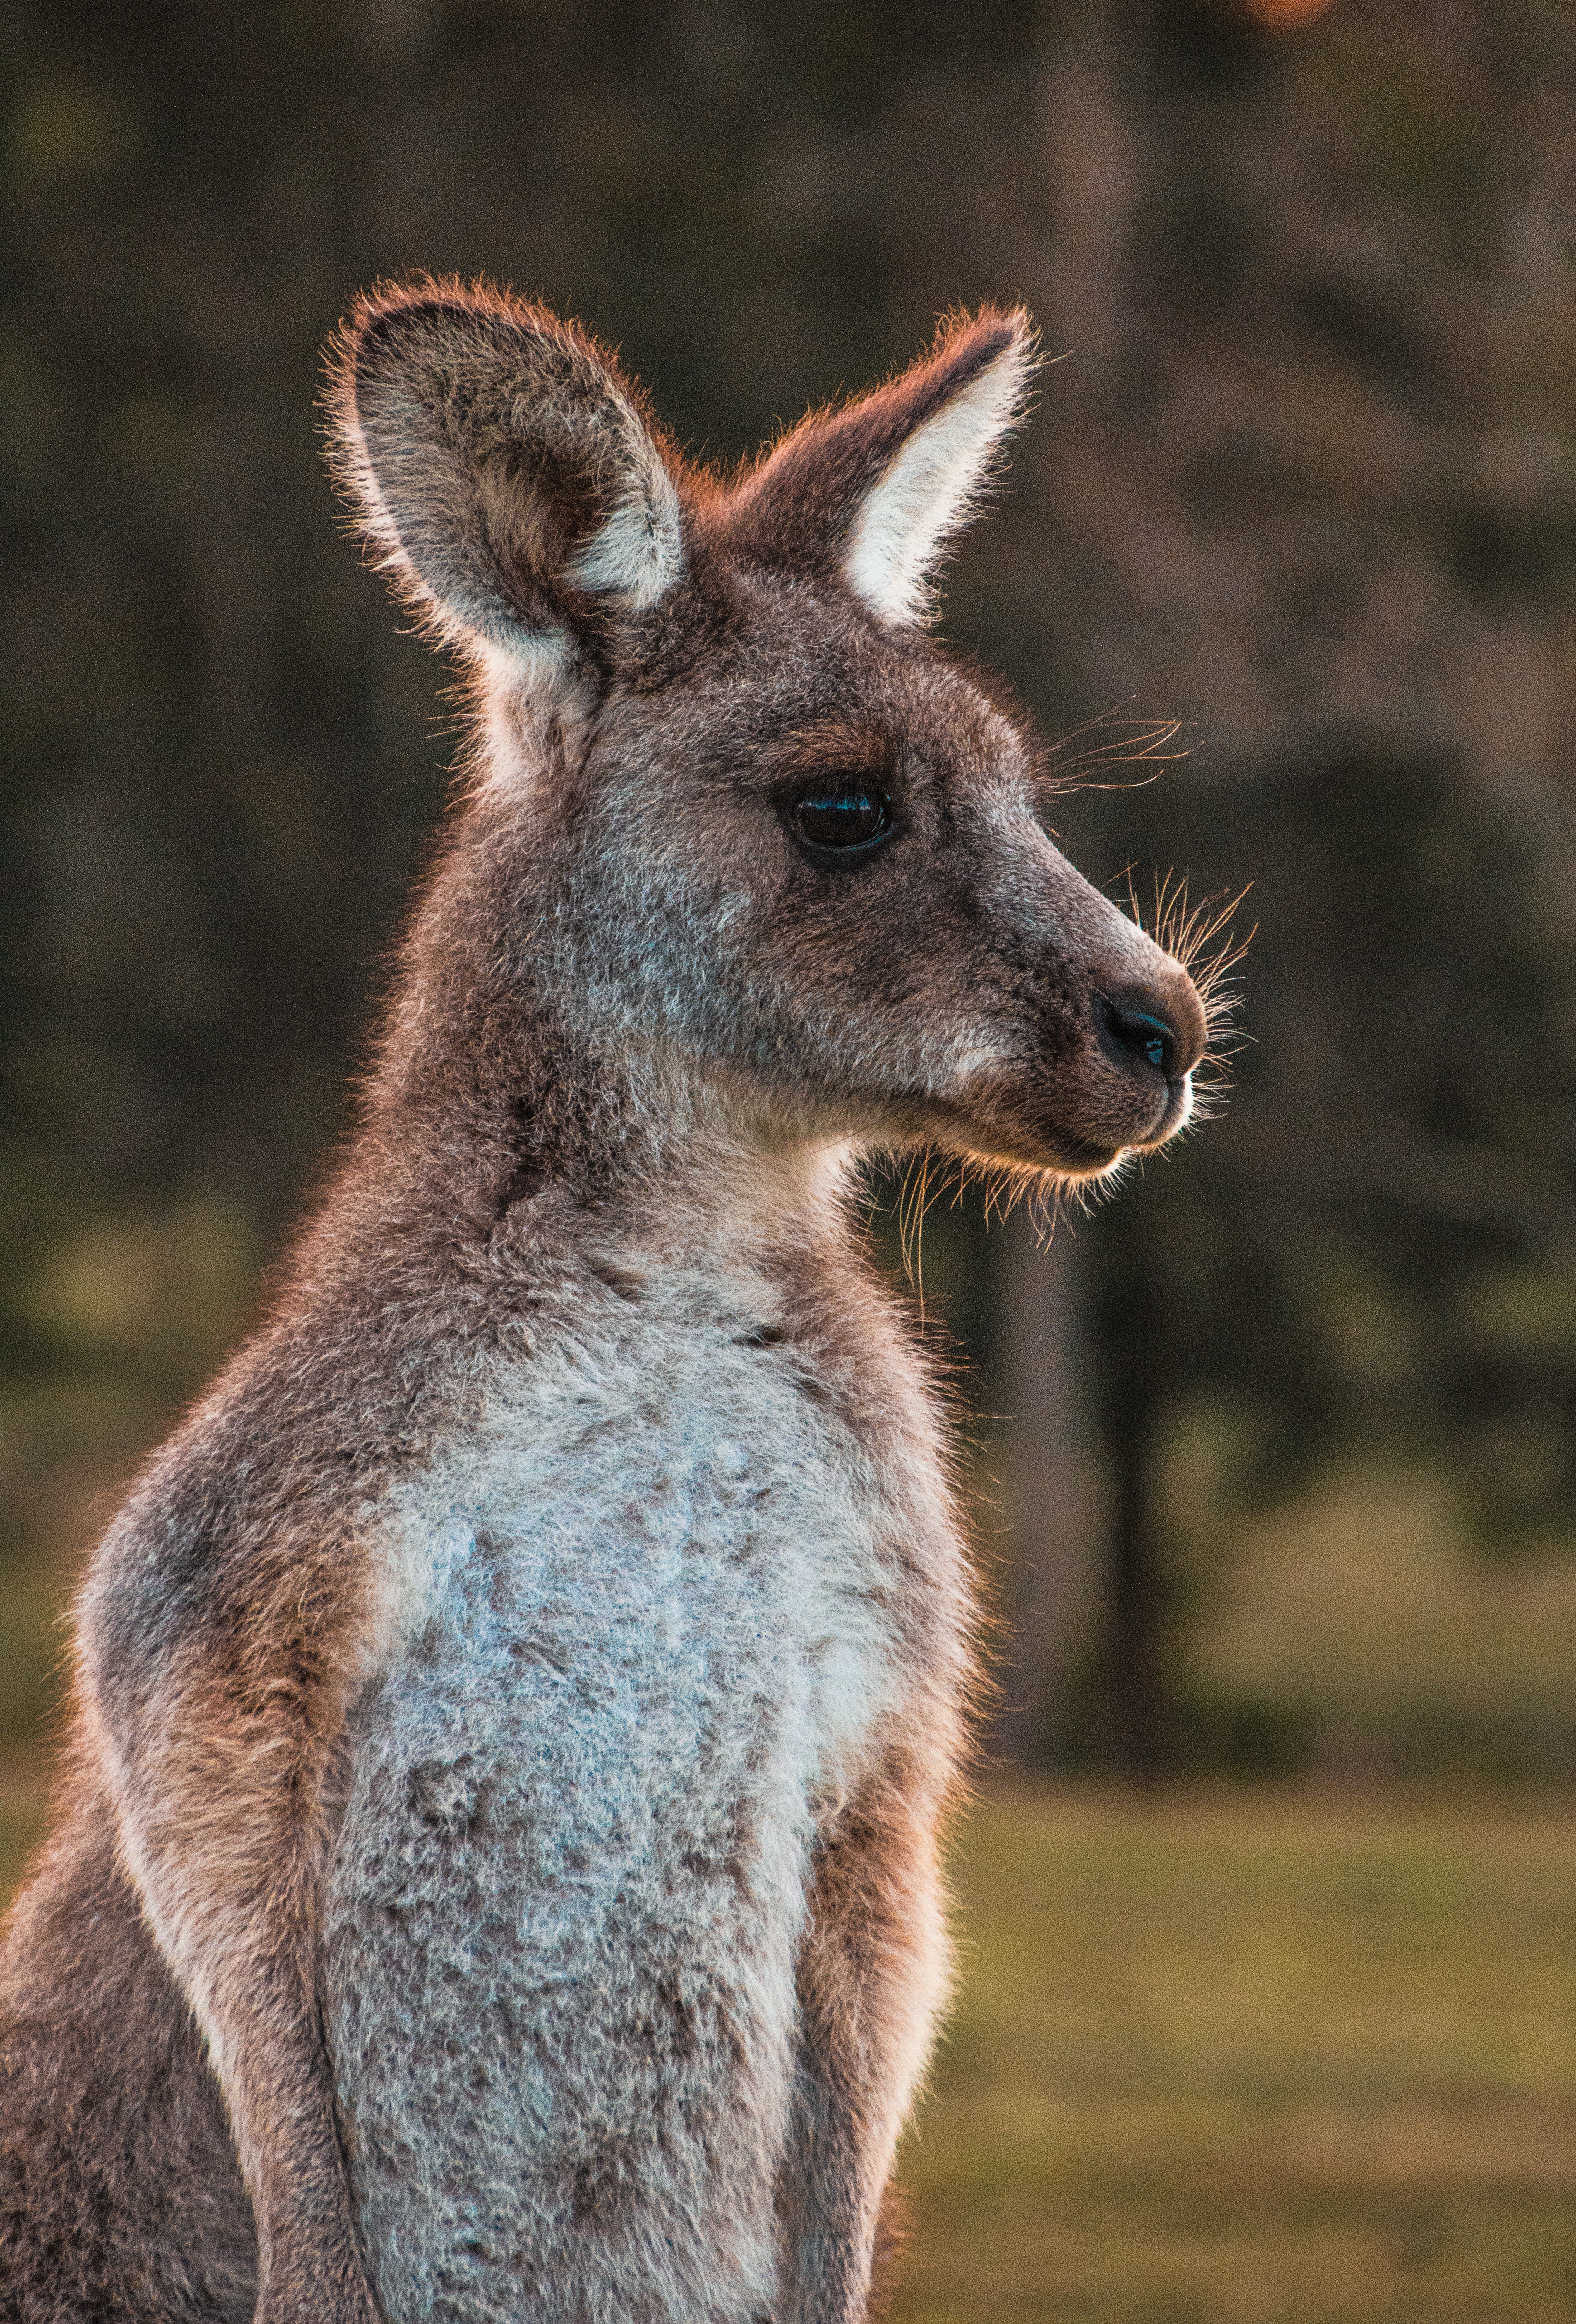 ENTITY shares facts about the female reproductive system, as inspired by Wednesday Martin's "The Button." Photo of kangaroo.